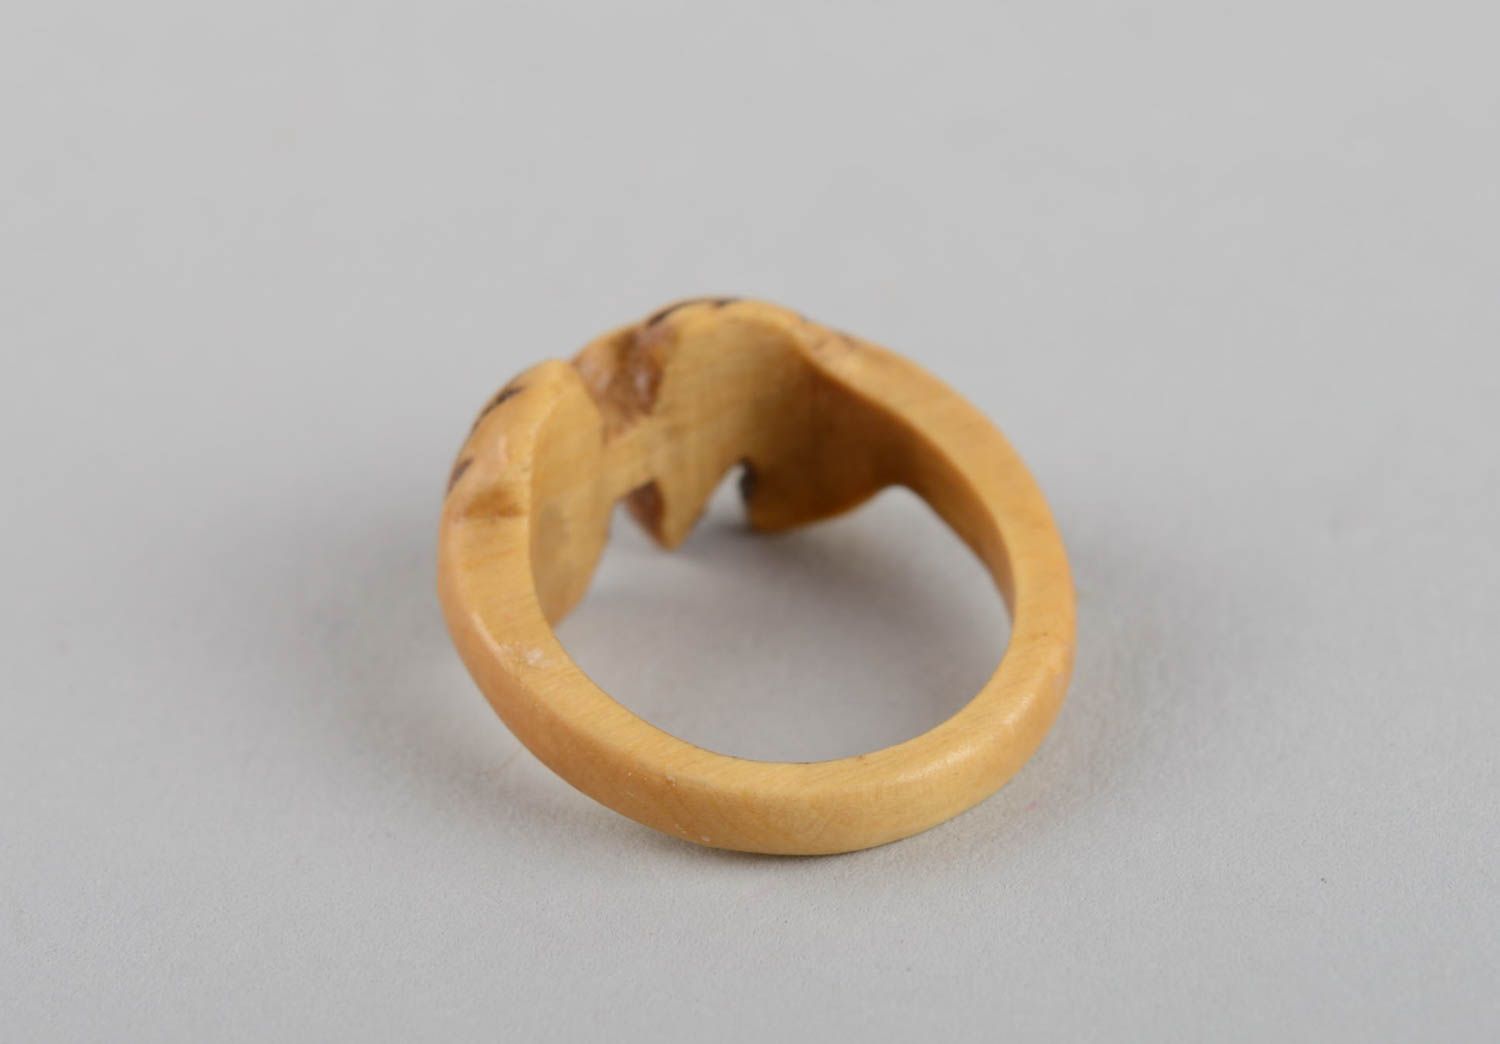 Unusual handmade wooden ring wood craft ideas fashion accessories for girls photo 10